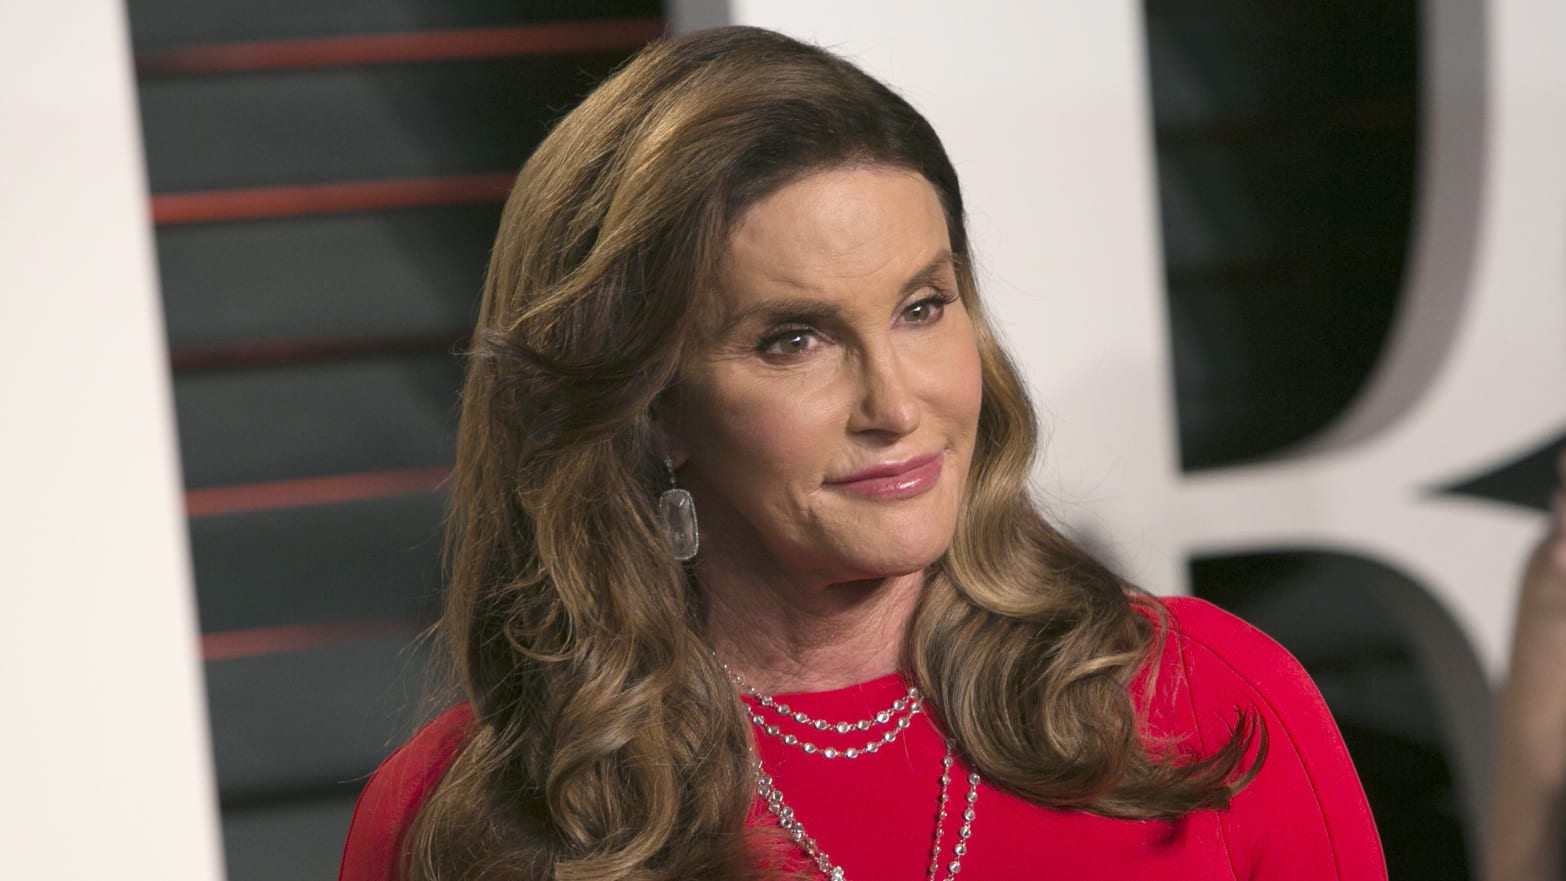 Caitlyn Jenner Wants to Date Men. So What?